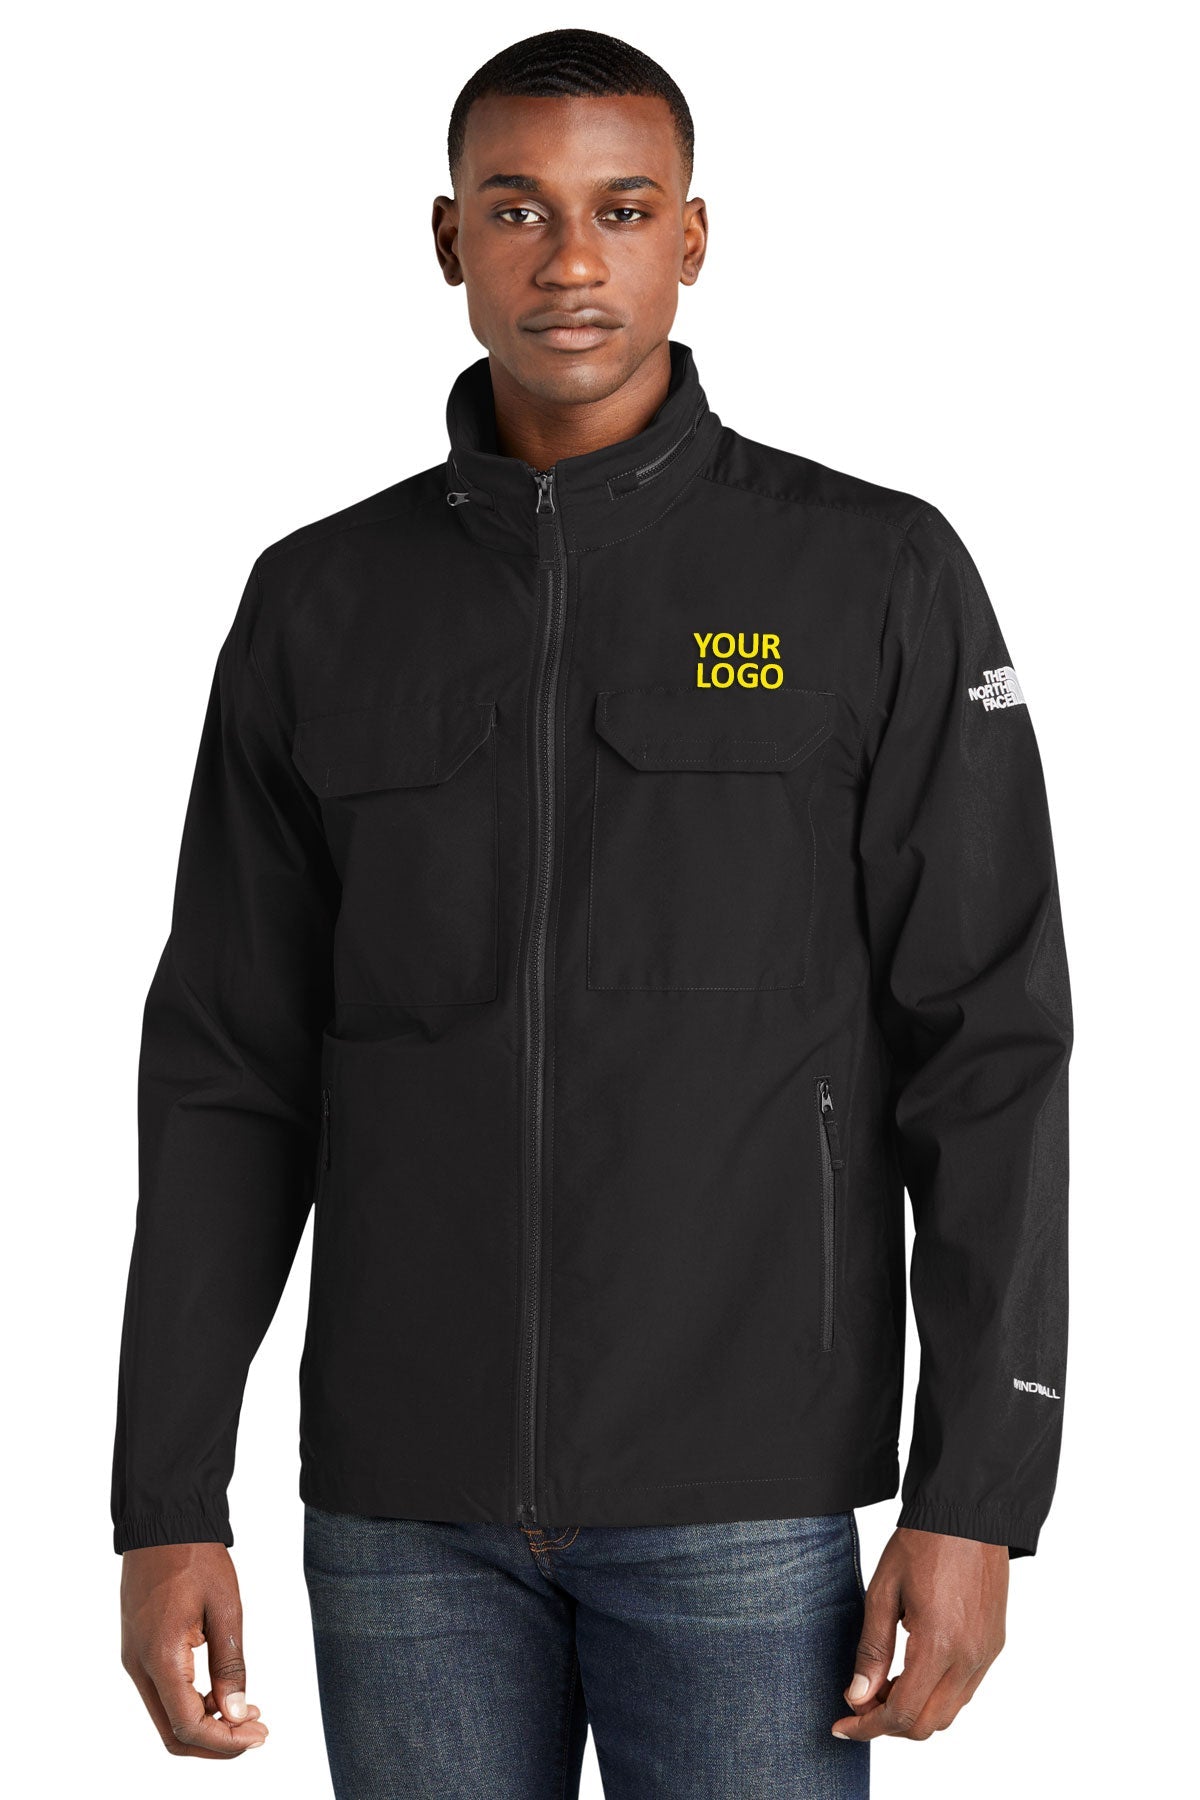 The North Face Packable Travel Jacket TNF Black